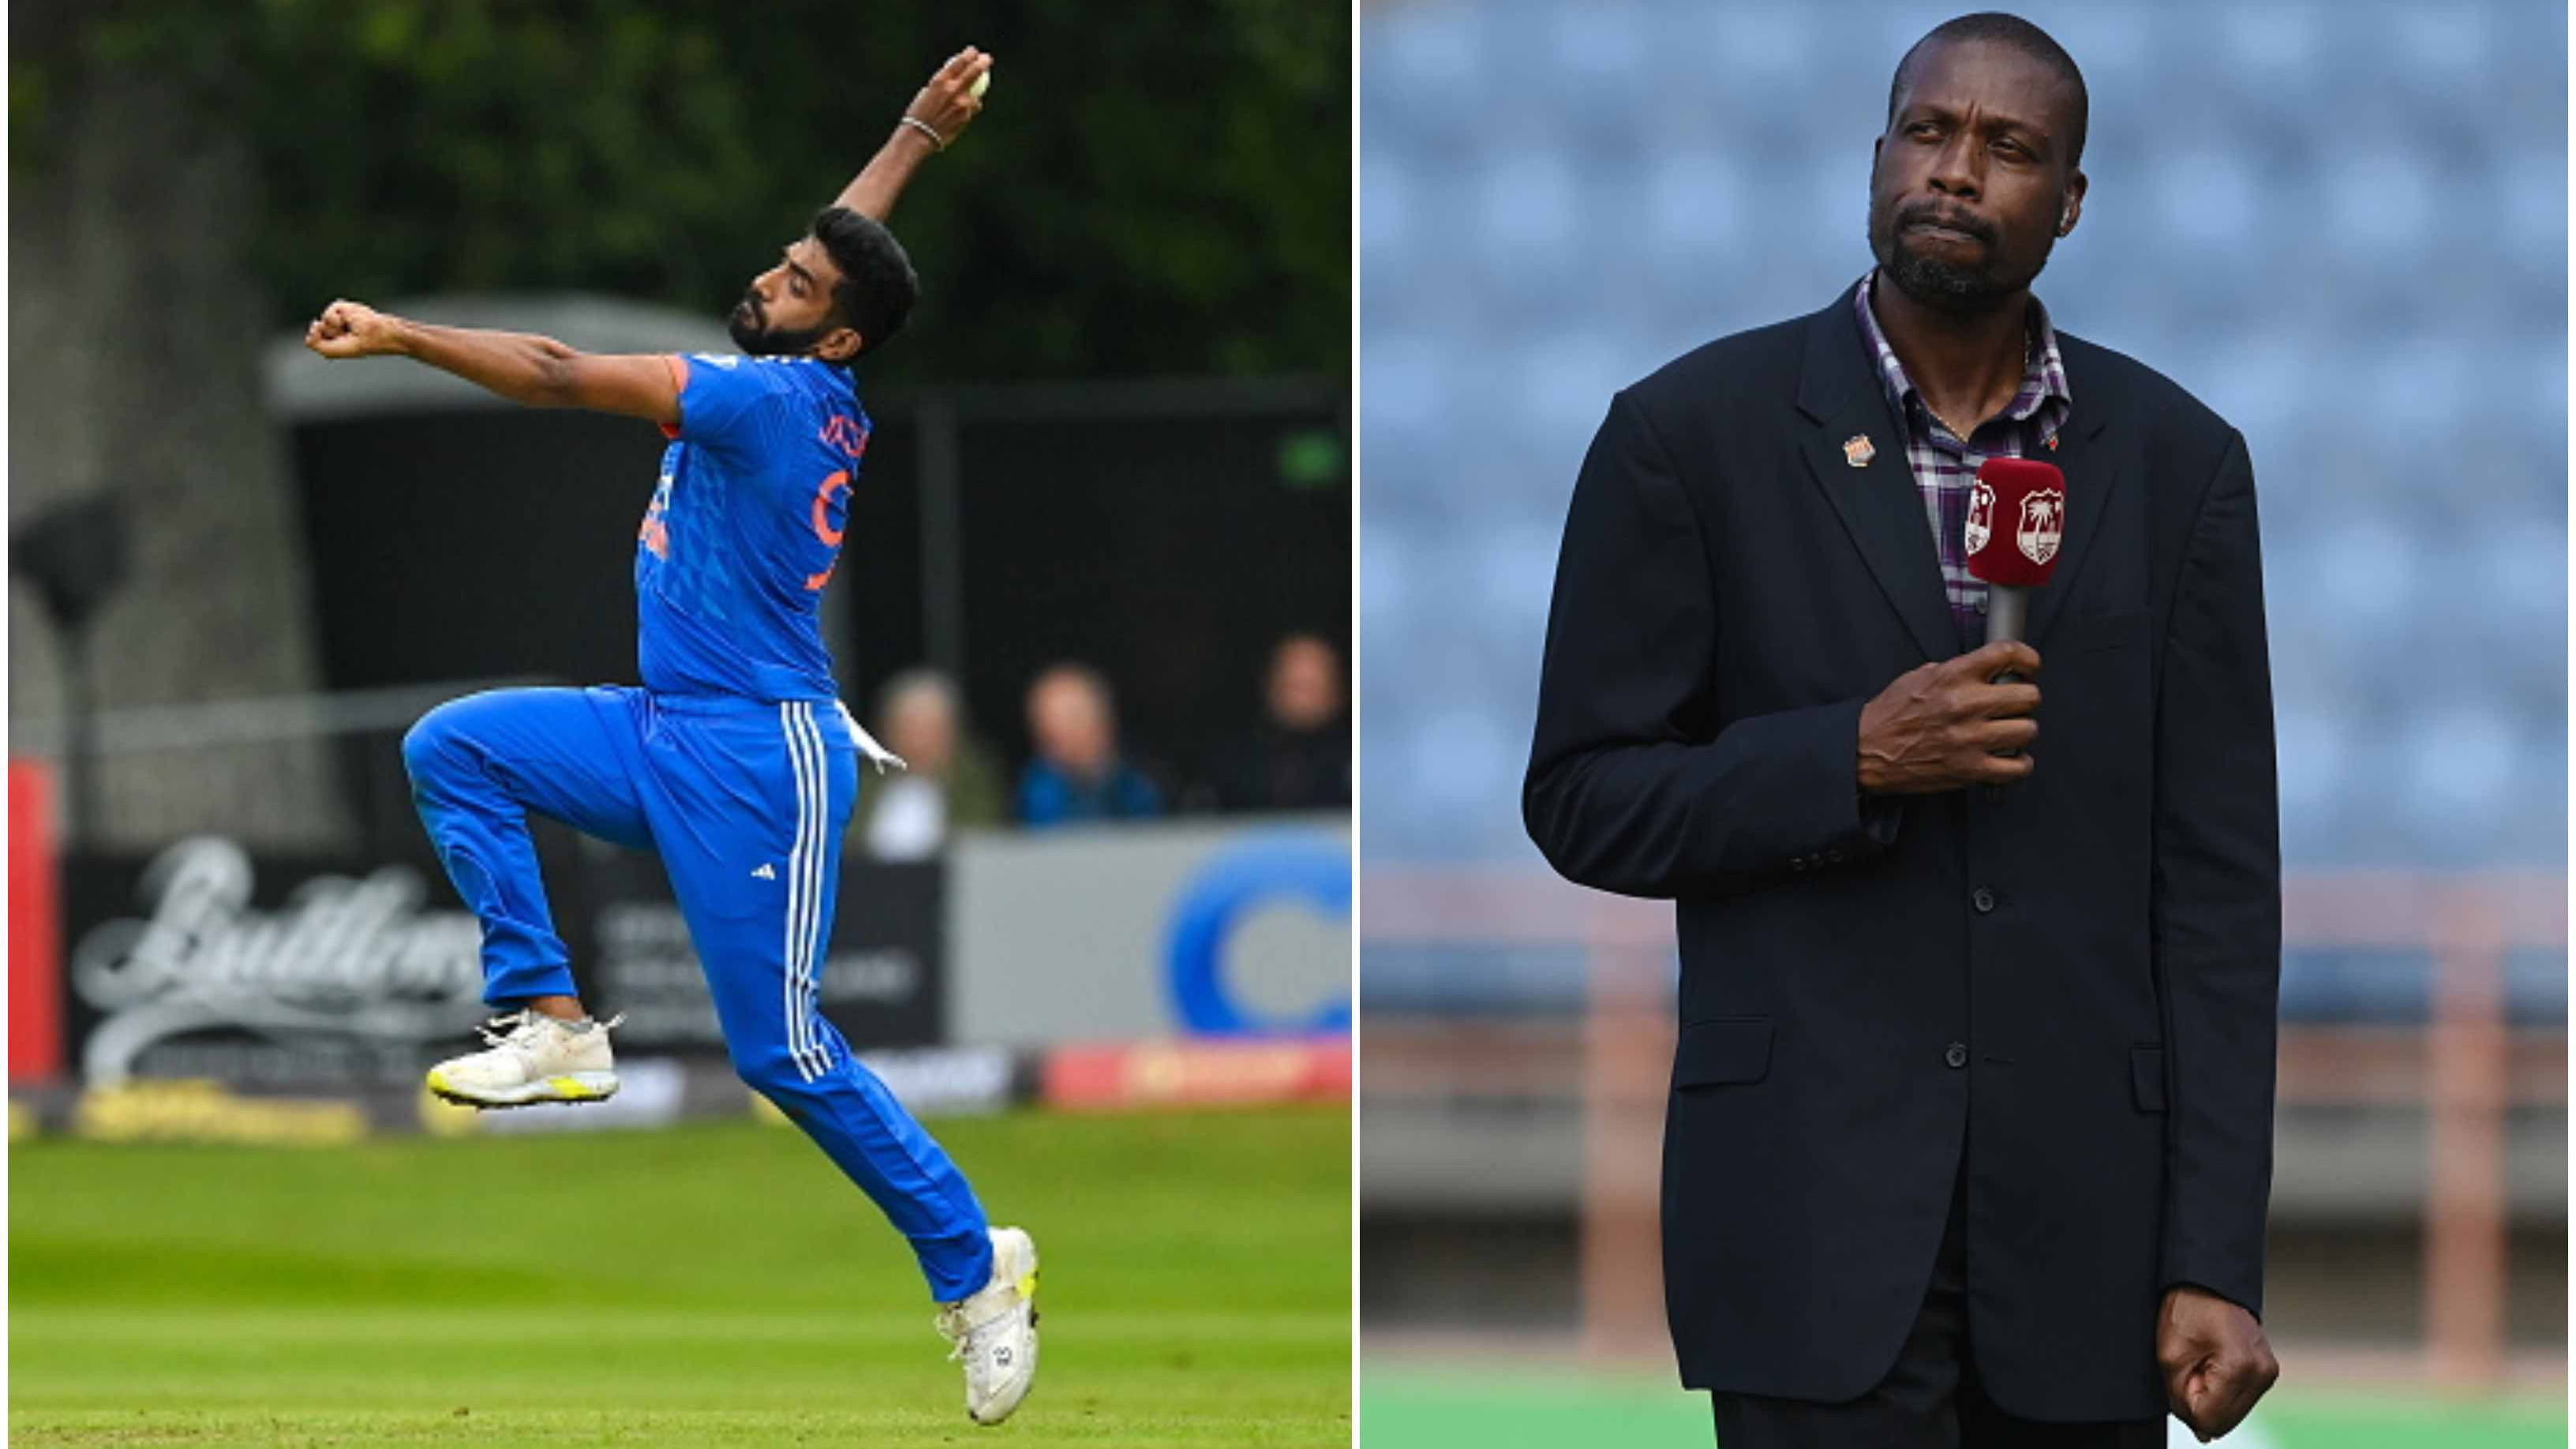 CWC 2023: “His presence in the World Cup will make India favourites,” Ambrose showers rich compliment on Bumrah